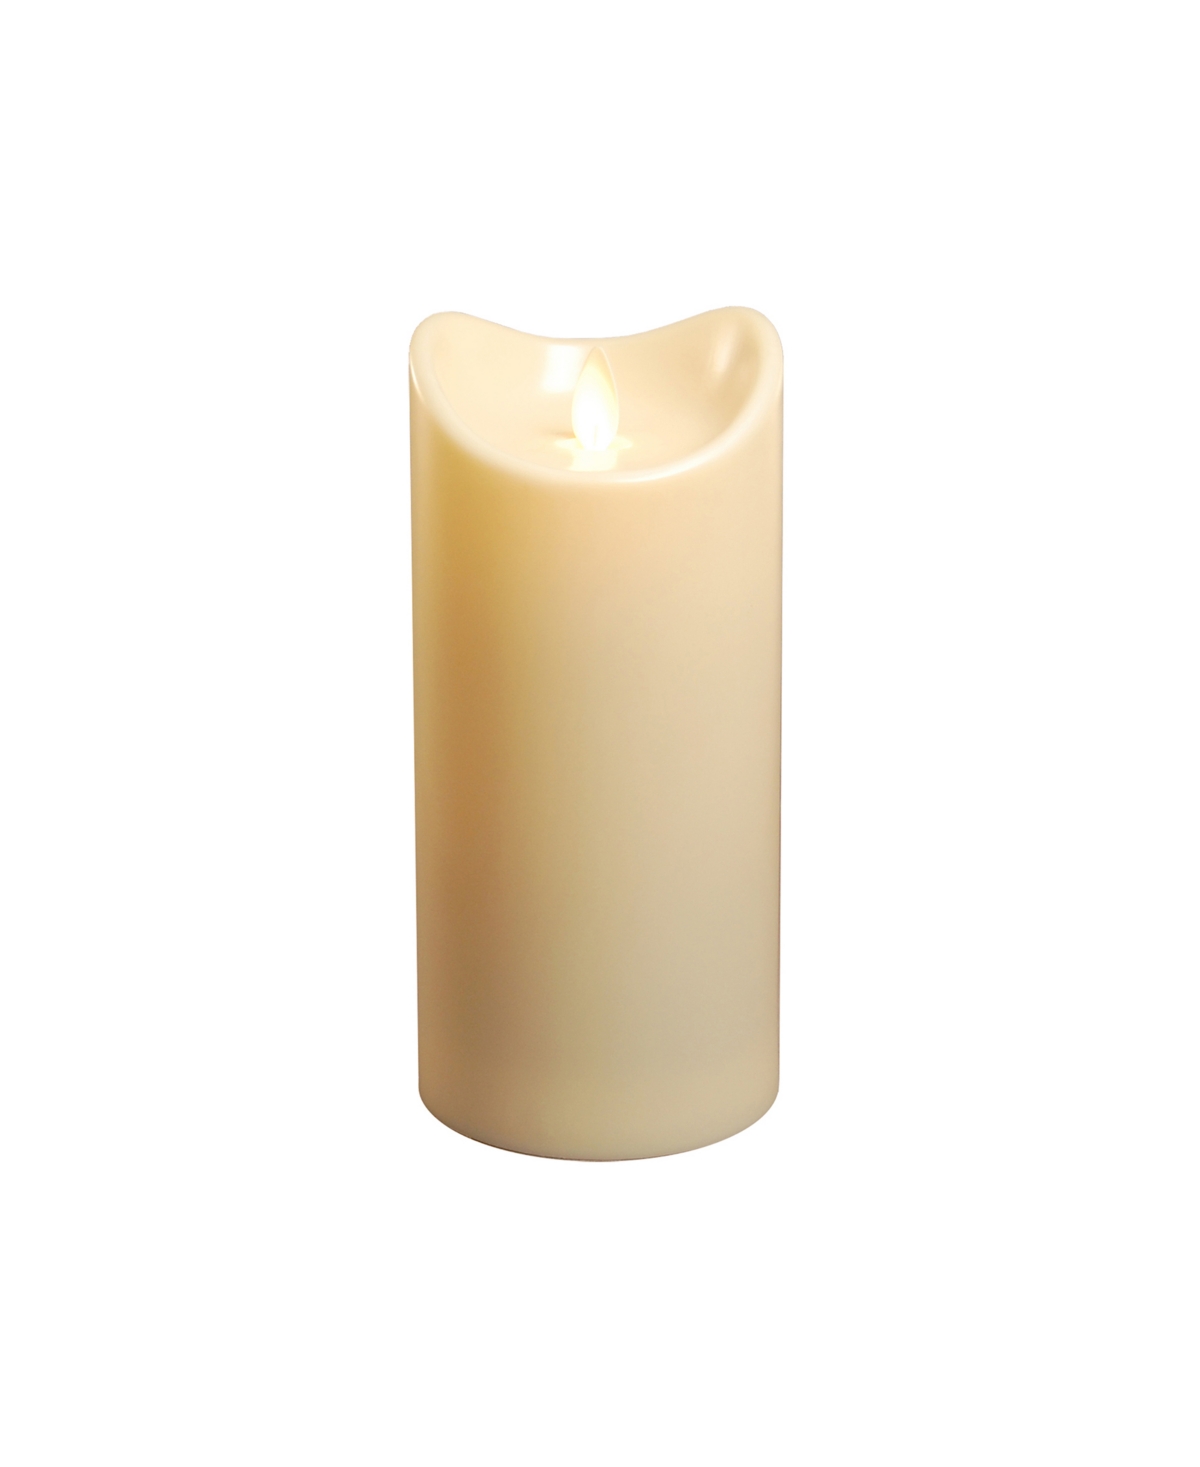 Lumabase 7" Cream Battery Operated Led Candle with Moving Flame - Natural